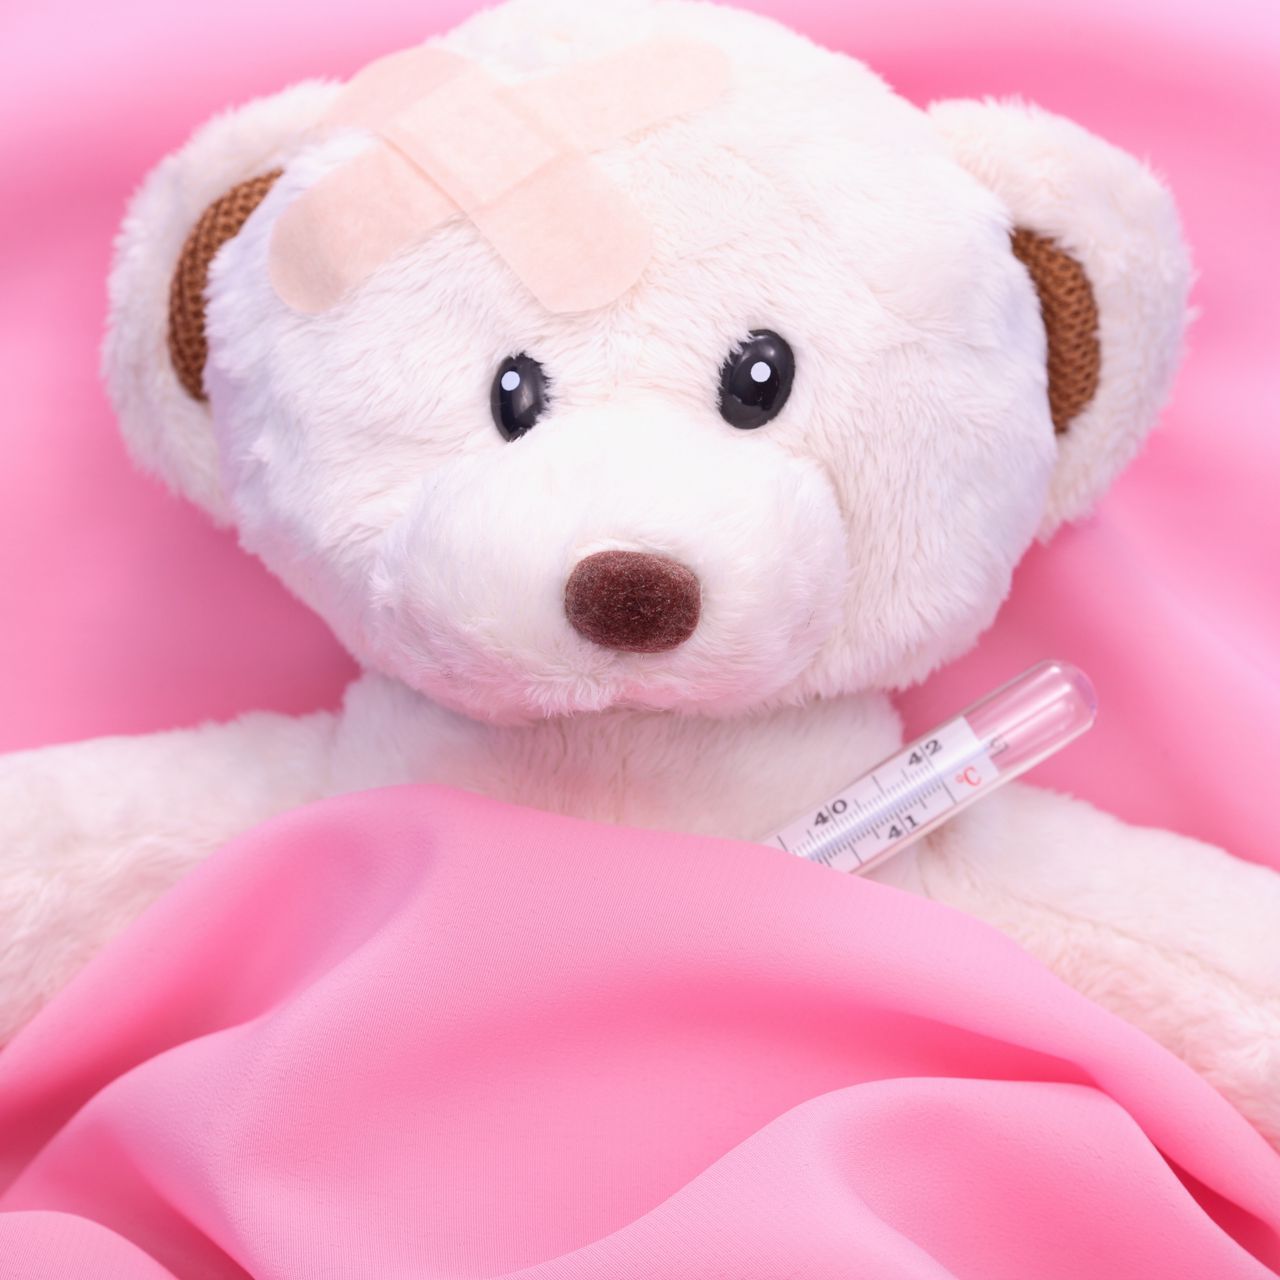 Download wallpaper 1280x1280 toy, teddy bear, thermometer, bed